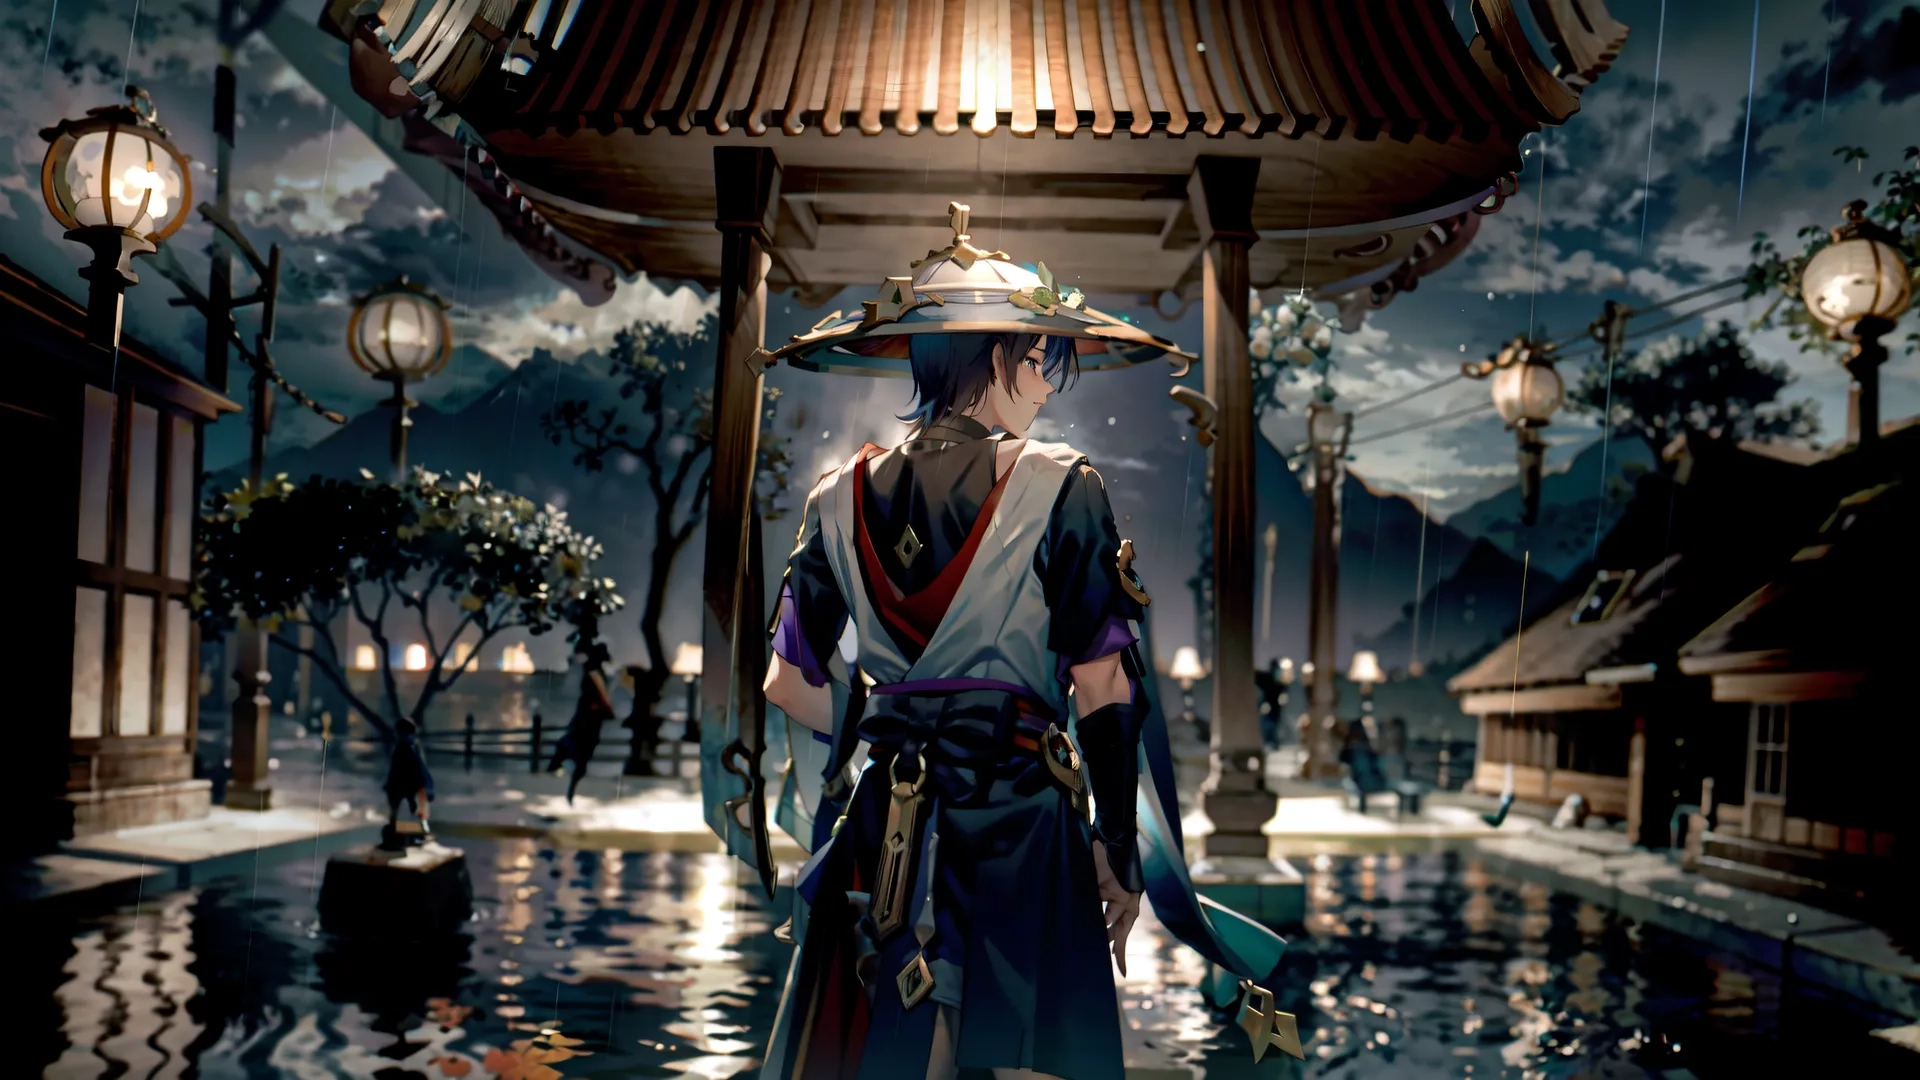 the woman in the mask is holding a sword at night walking past lanterns and buildings on a rainy day, behind her is an oriental roof
